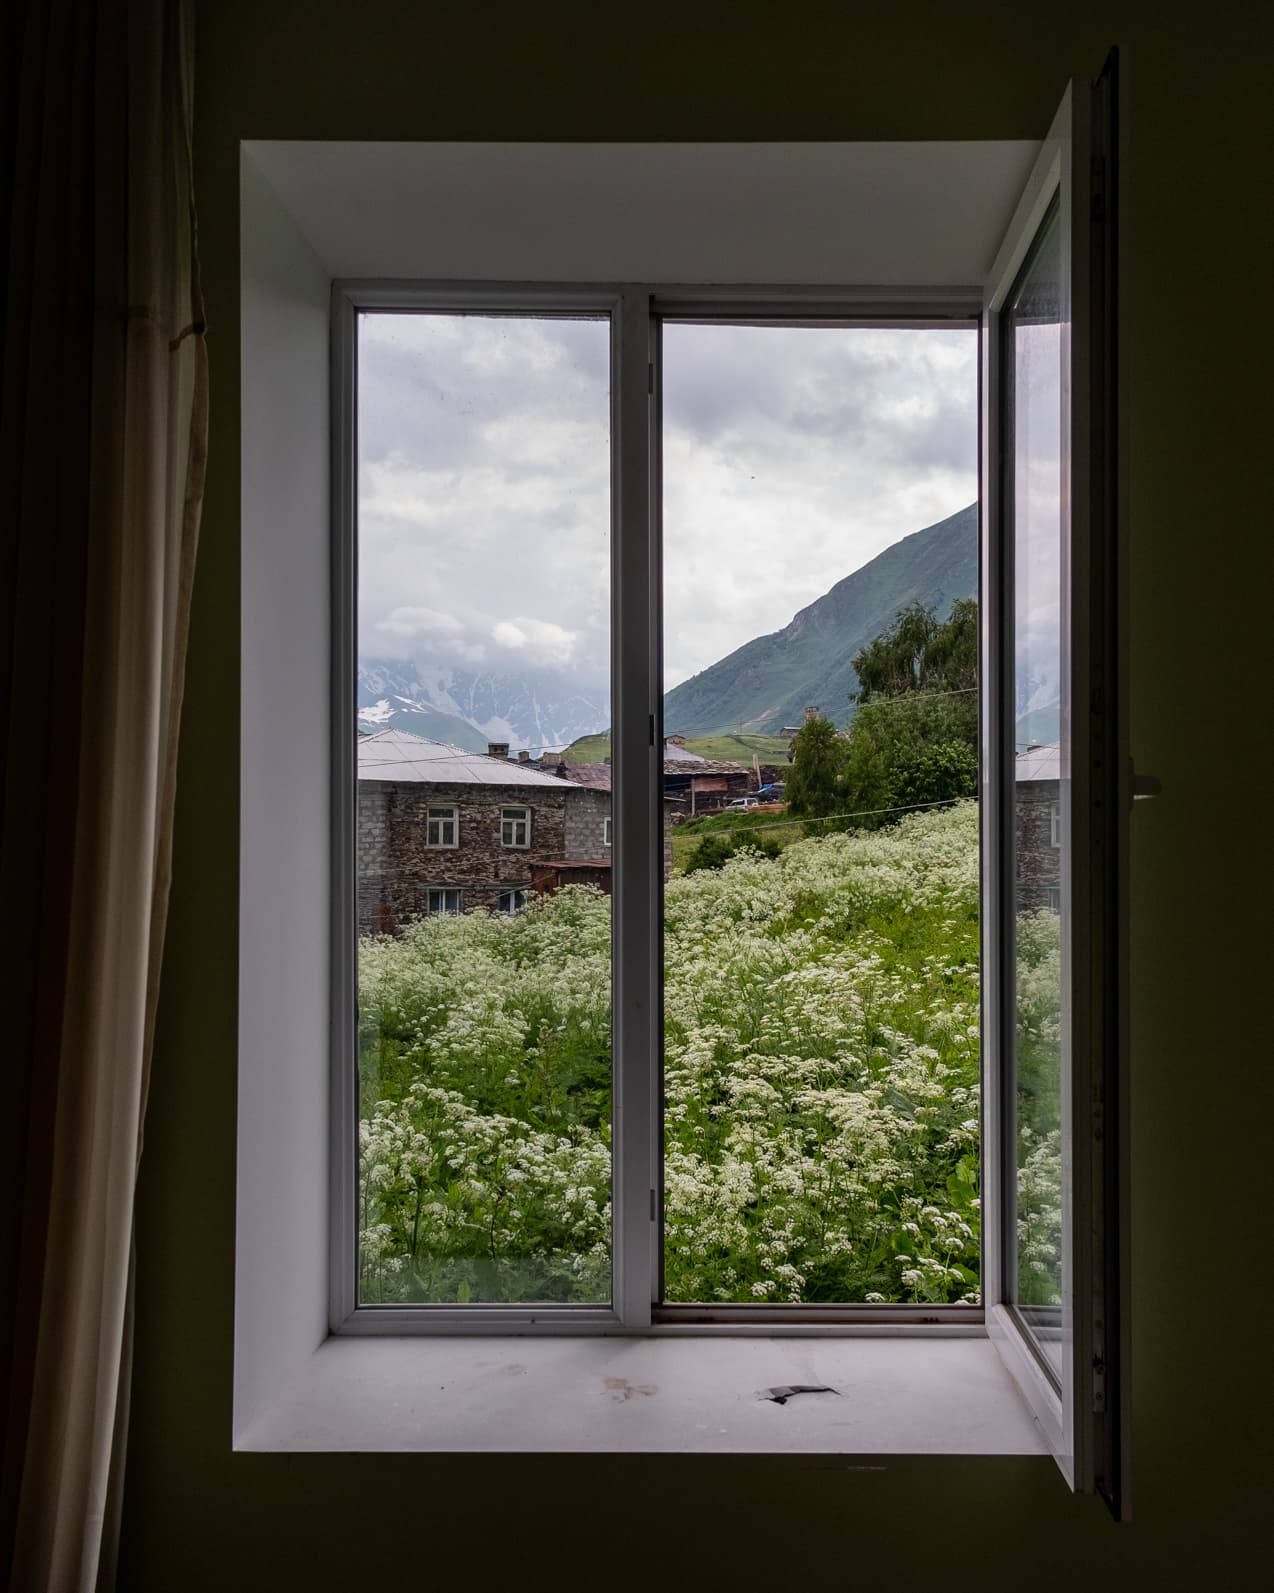 The view from our room at Caucasus Guesthouse in Ushguli